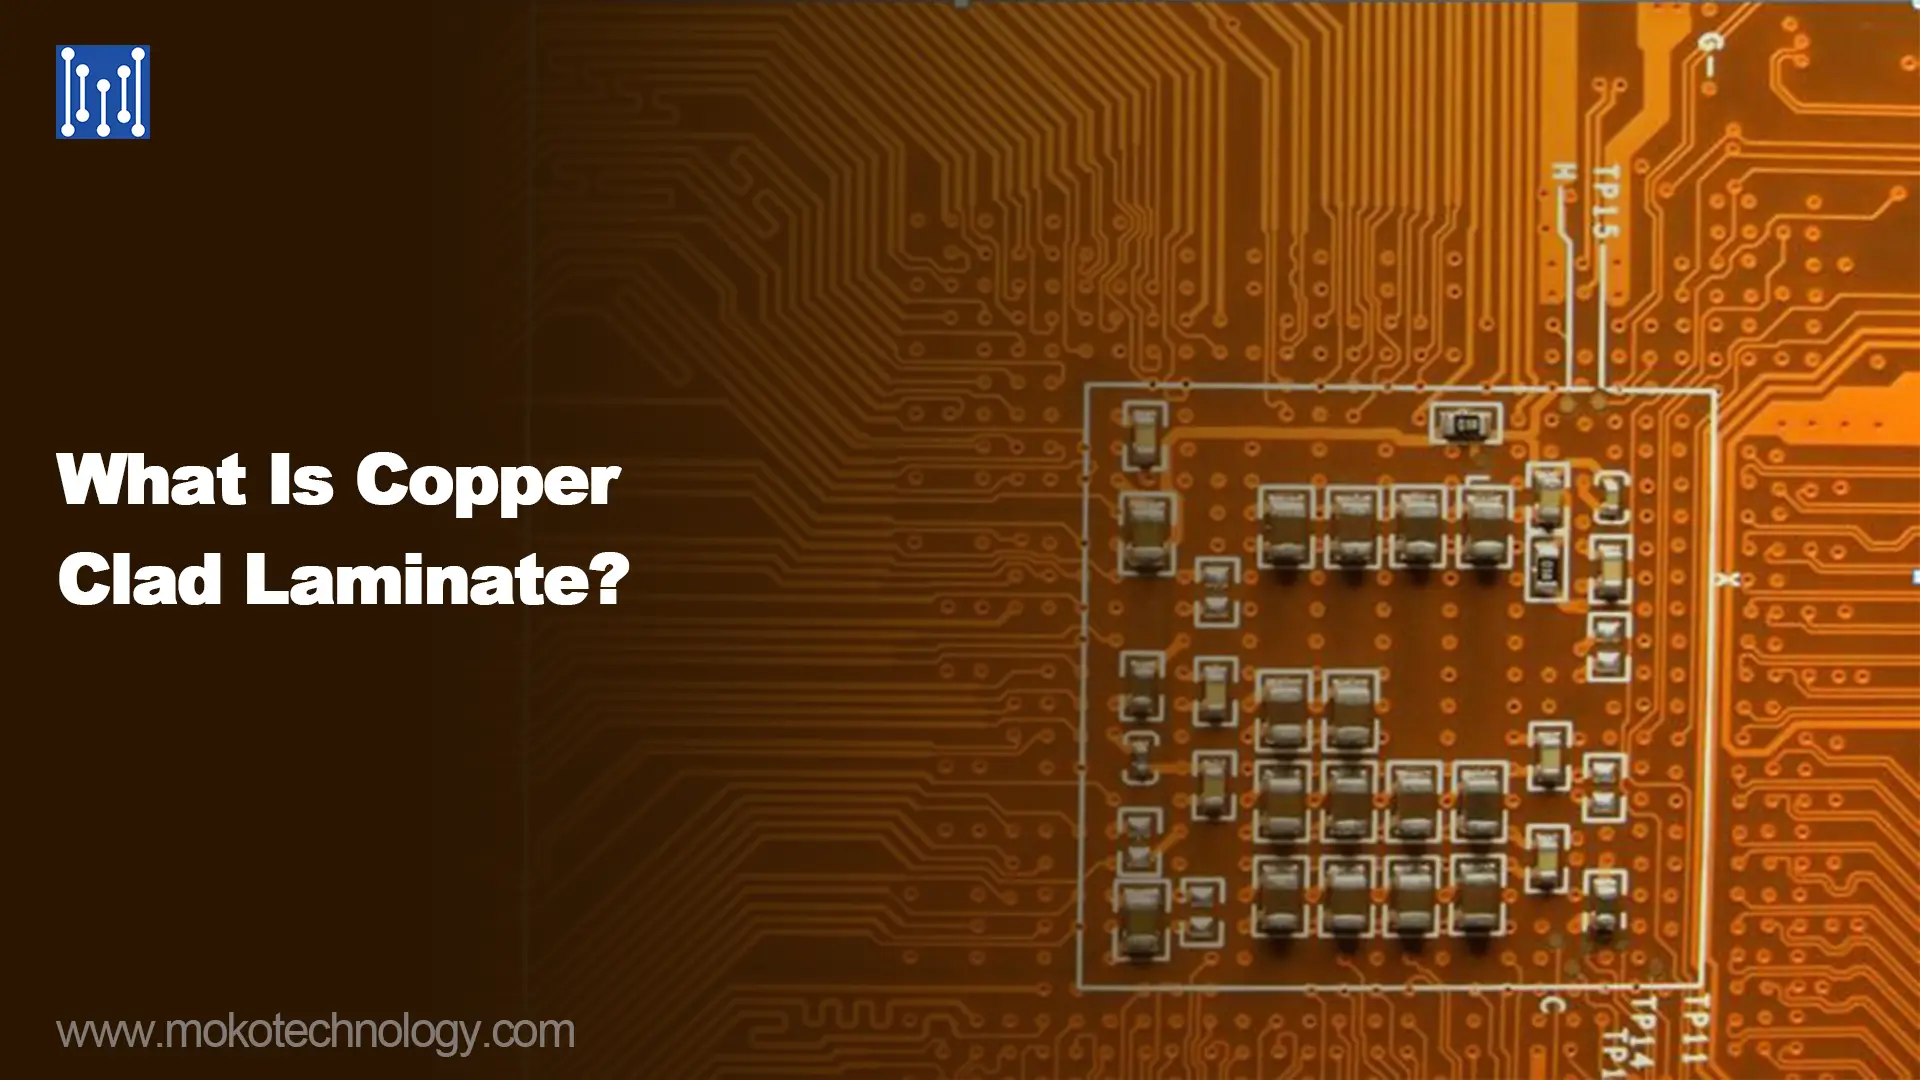 What Is Copper Clad Laminate?